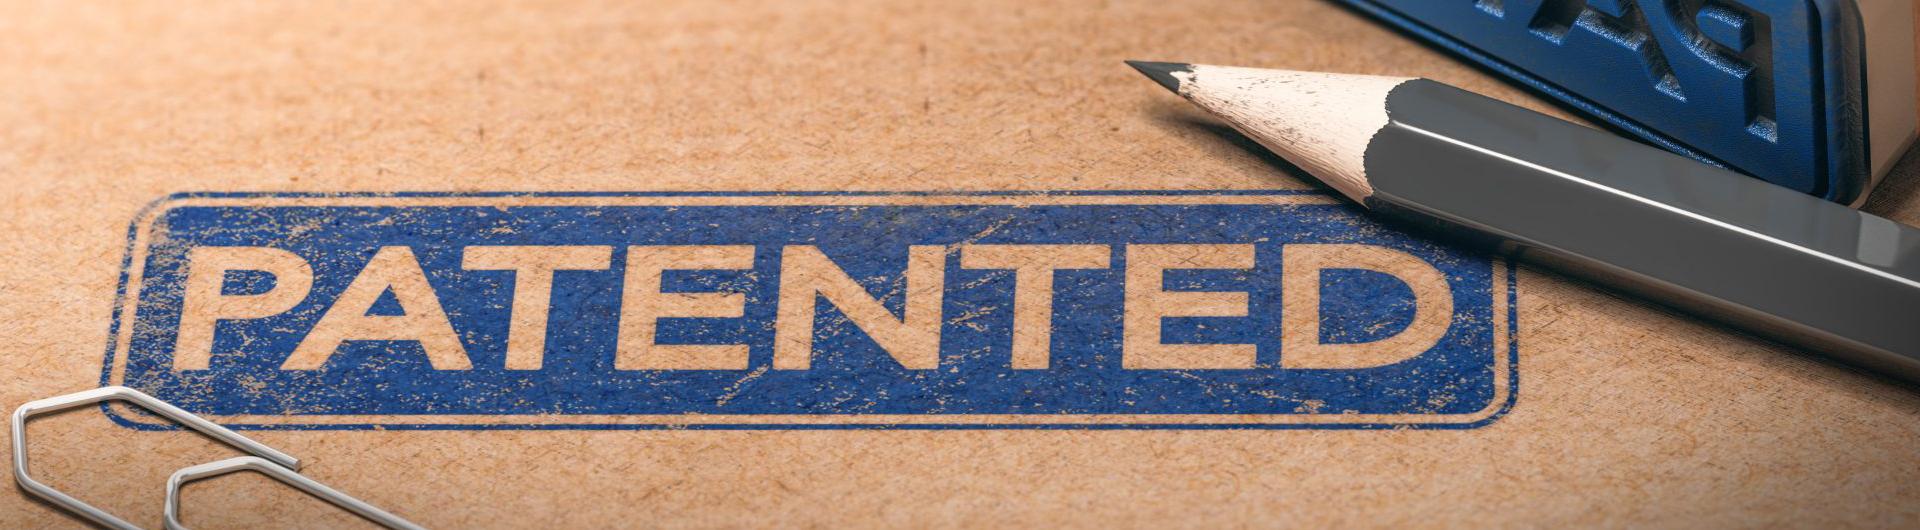 The word “Patented” is stamped in blue ink on a brown folder. The ink is surrounded by a paper clip and gray pencil.